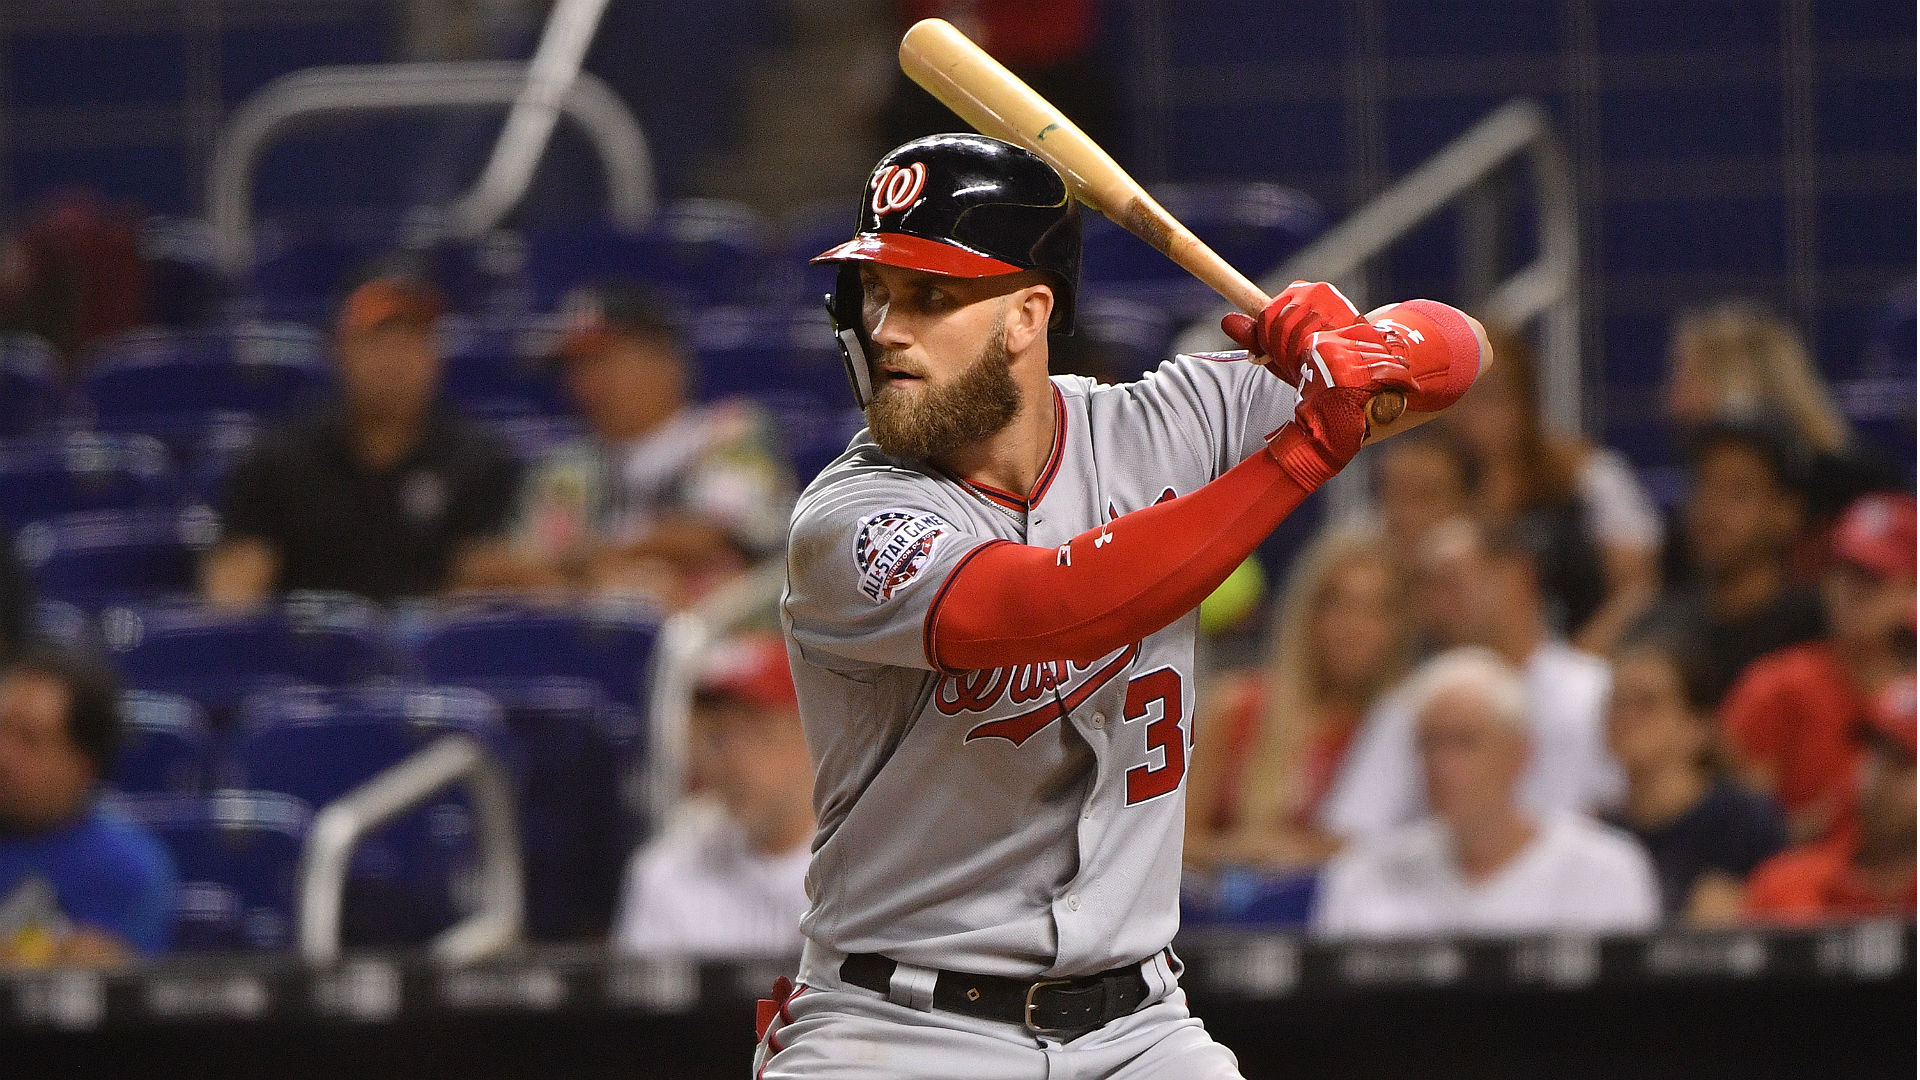 Harper has reportedly nixed deals in the $300-million range. If the Padres are still a bidder, their offer would likely need to be higher.